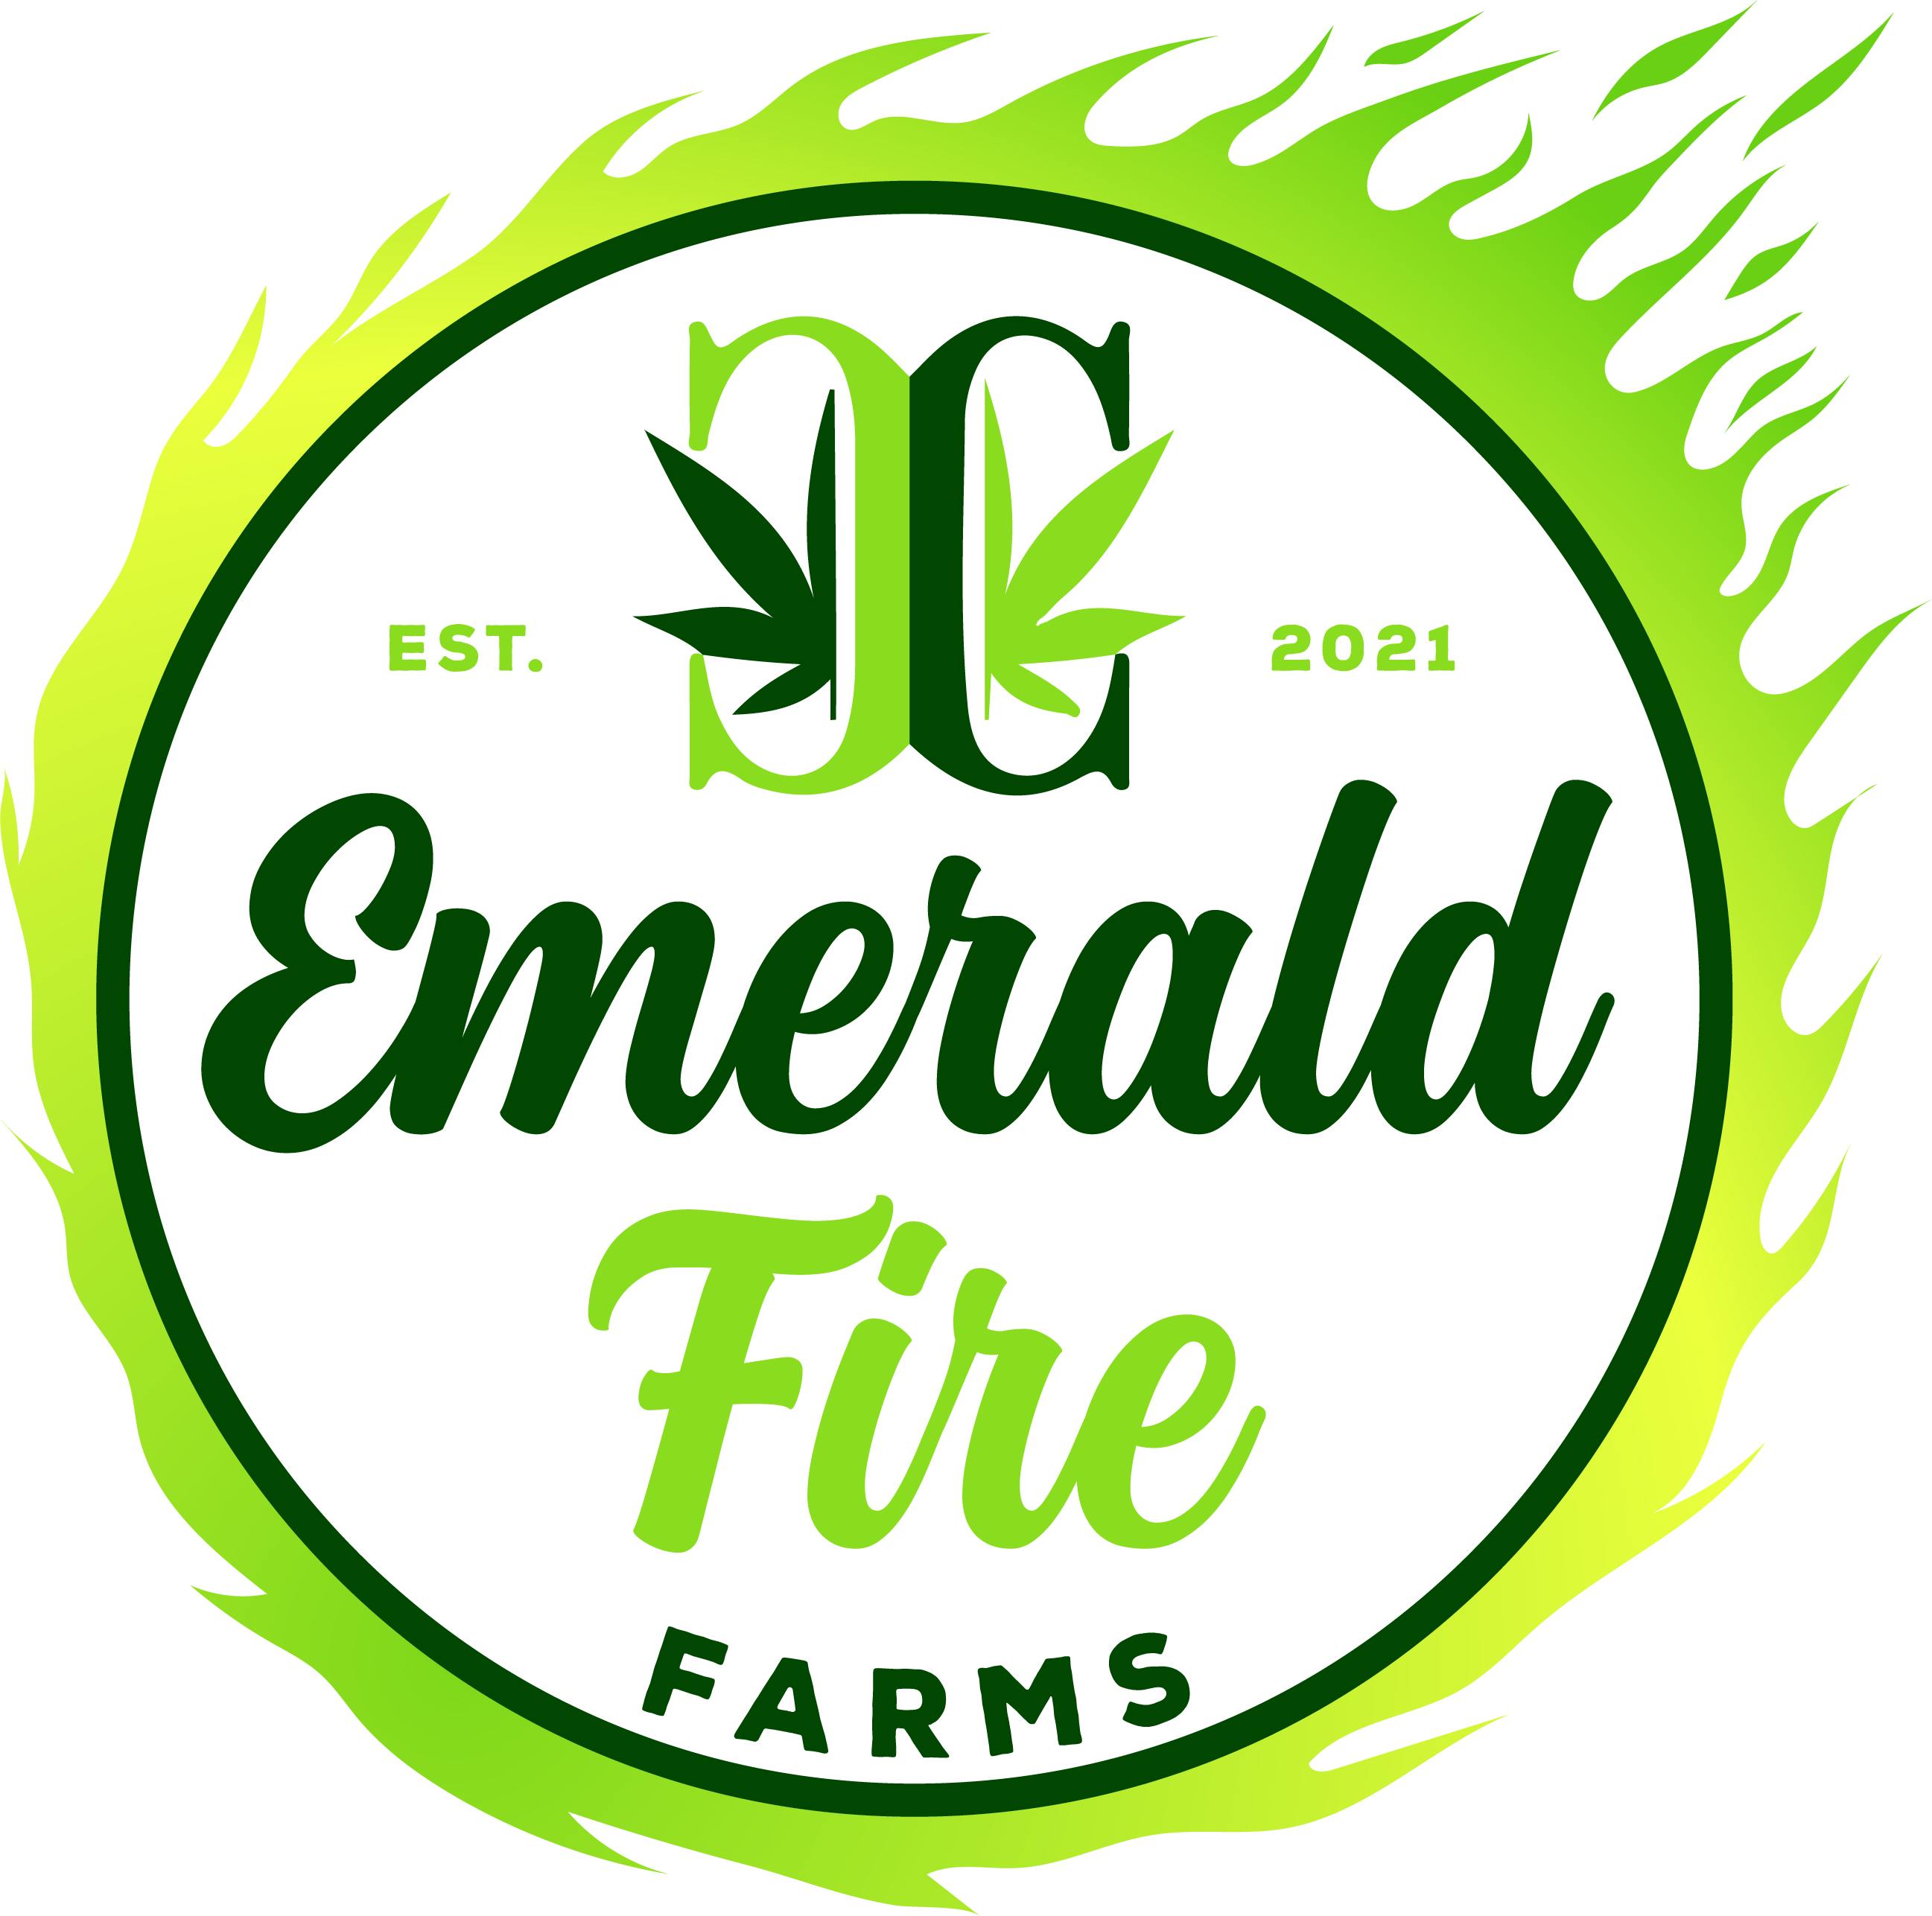 Emerald Fire Farms and Provisioning Center